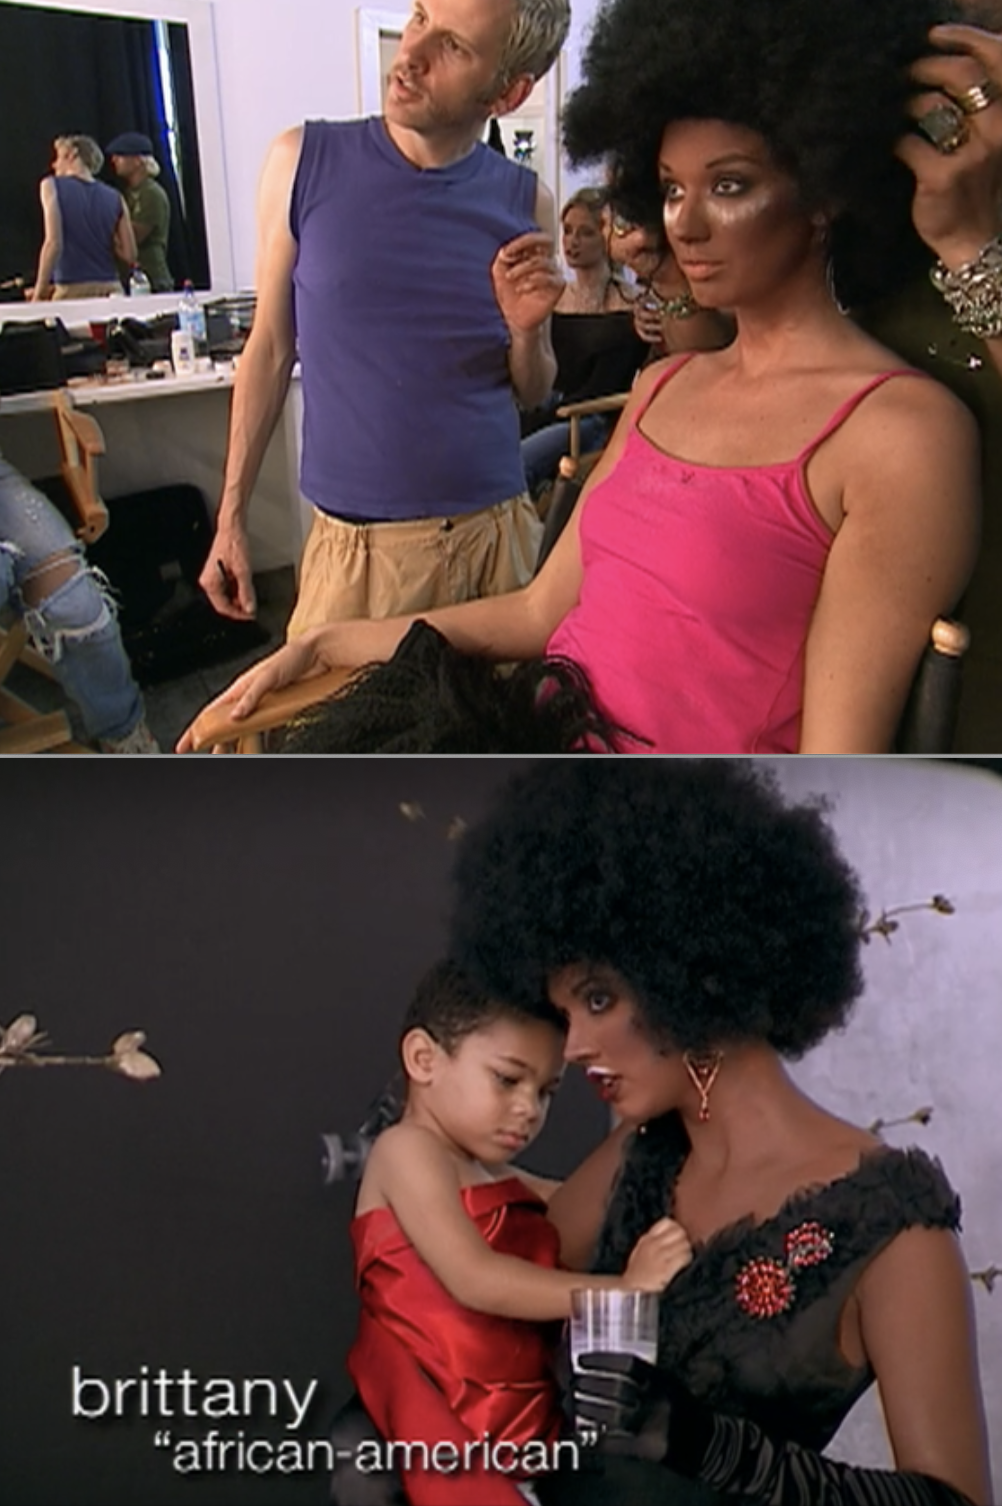 Contestants wearing blackface for a shoot